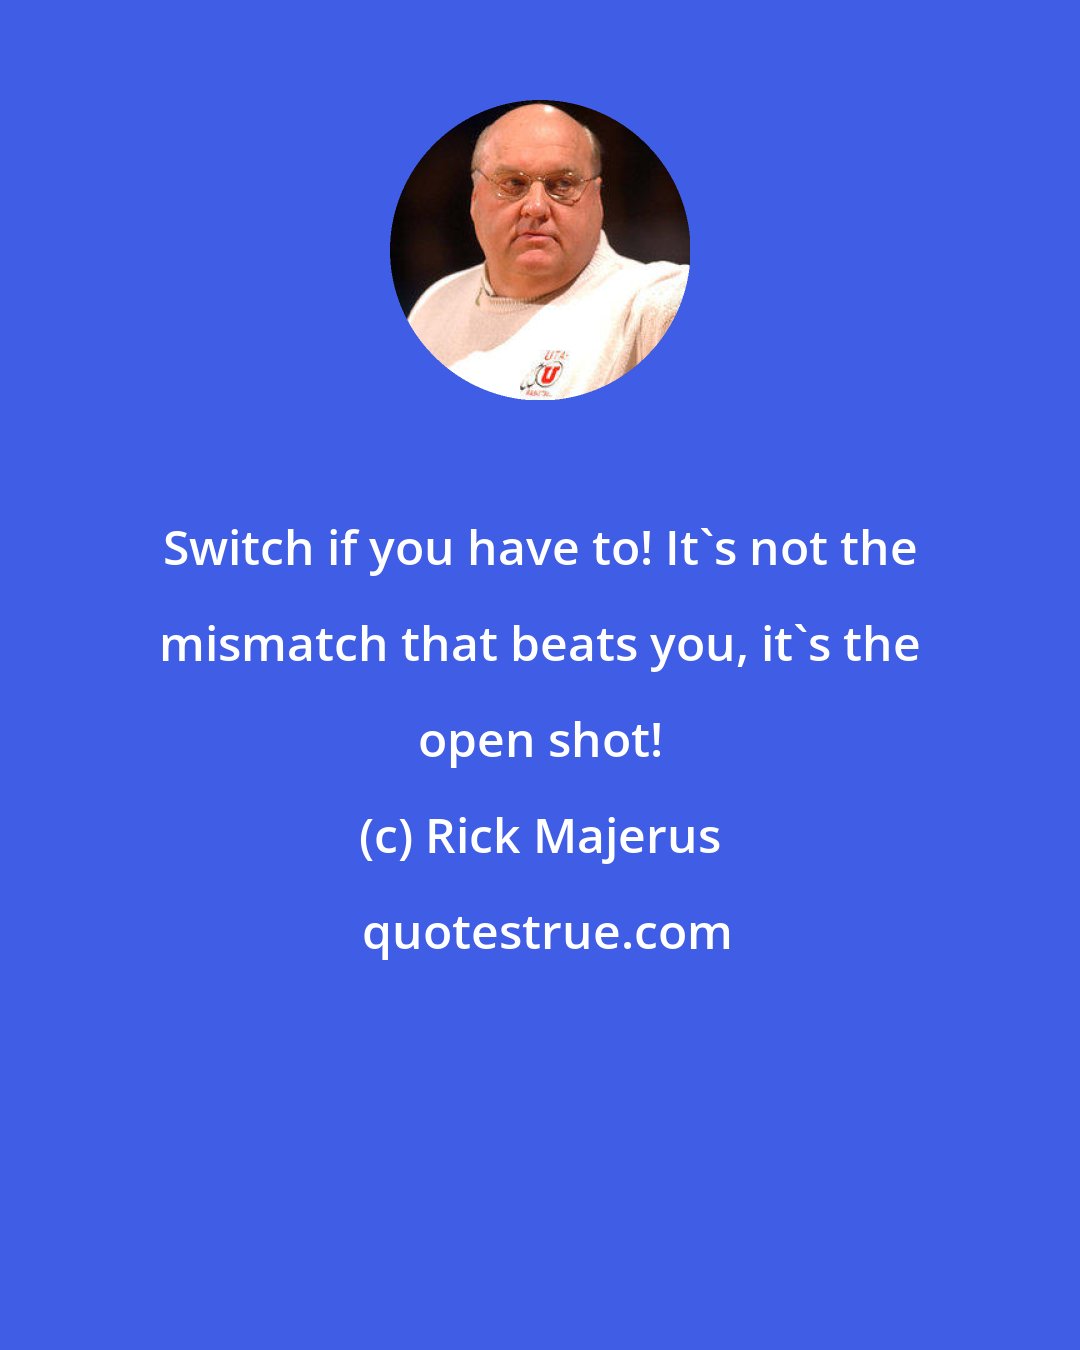 Rick Majerus: Switch if you have to! It's not the mismatch that beats you, it's the open shot!